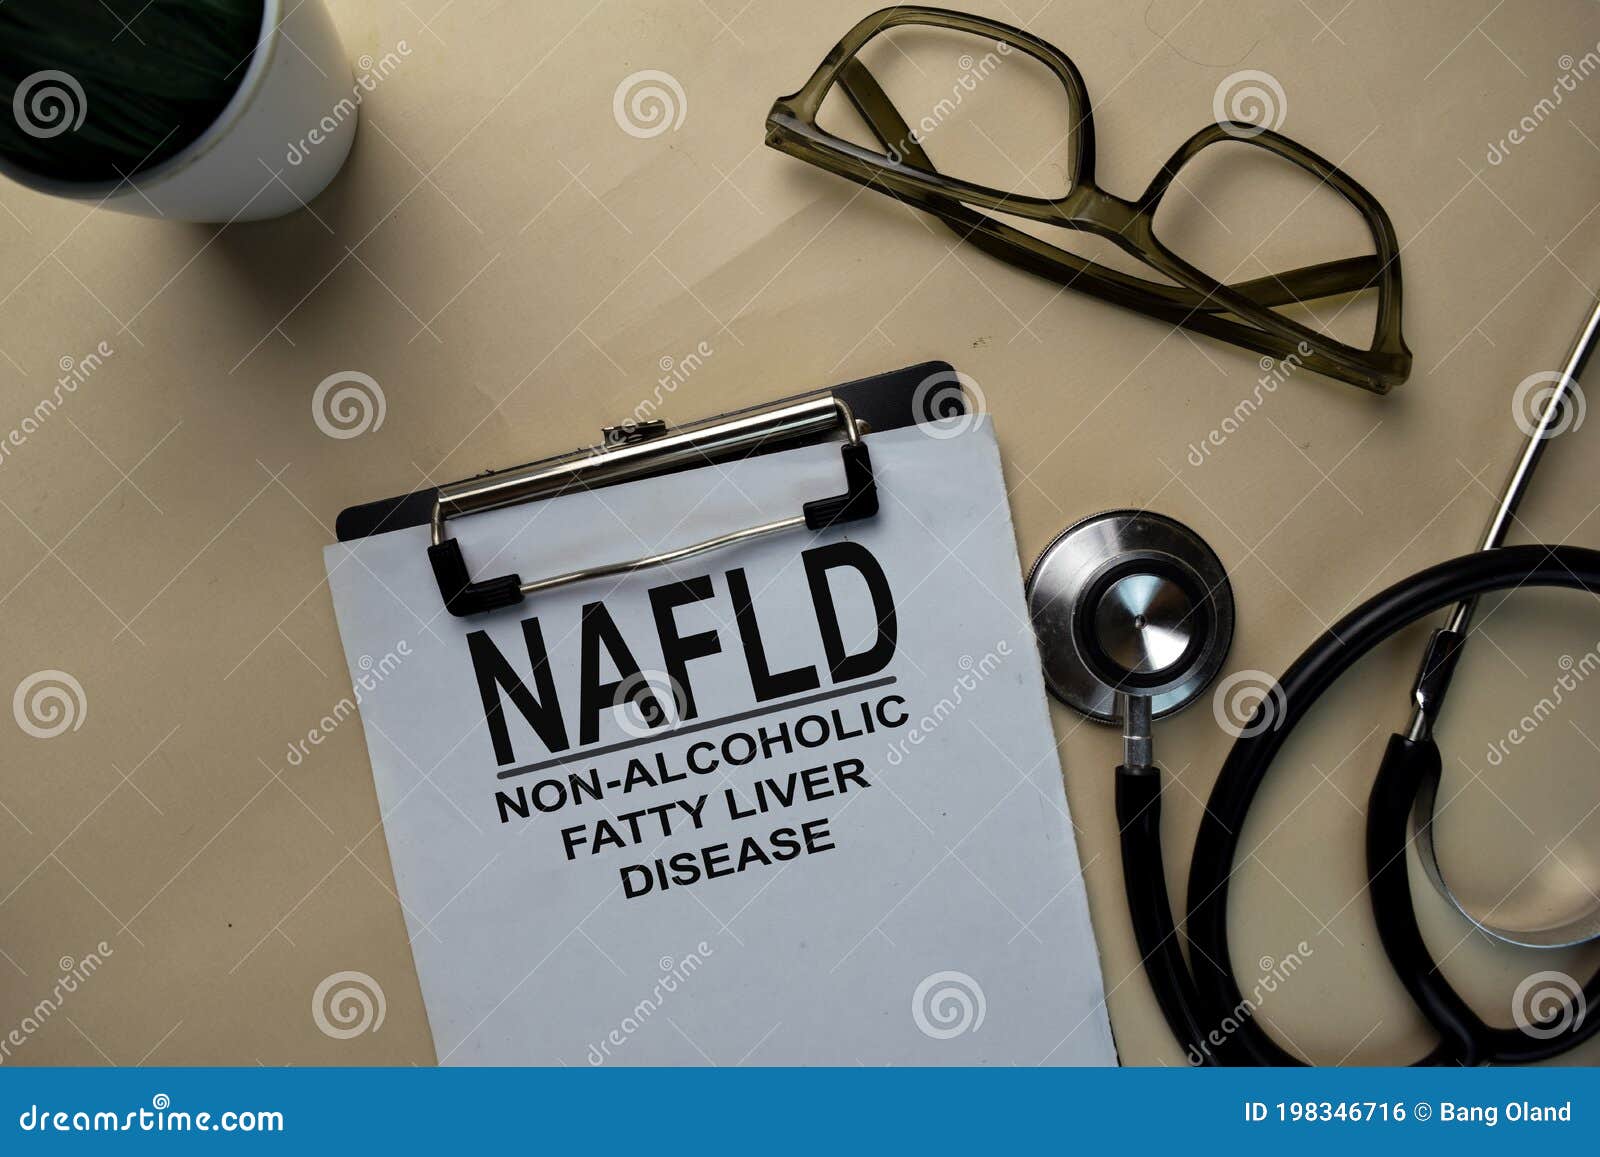 nafld - non-alcoholic fatty liver disease write on a paperwork  on office desk